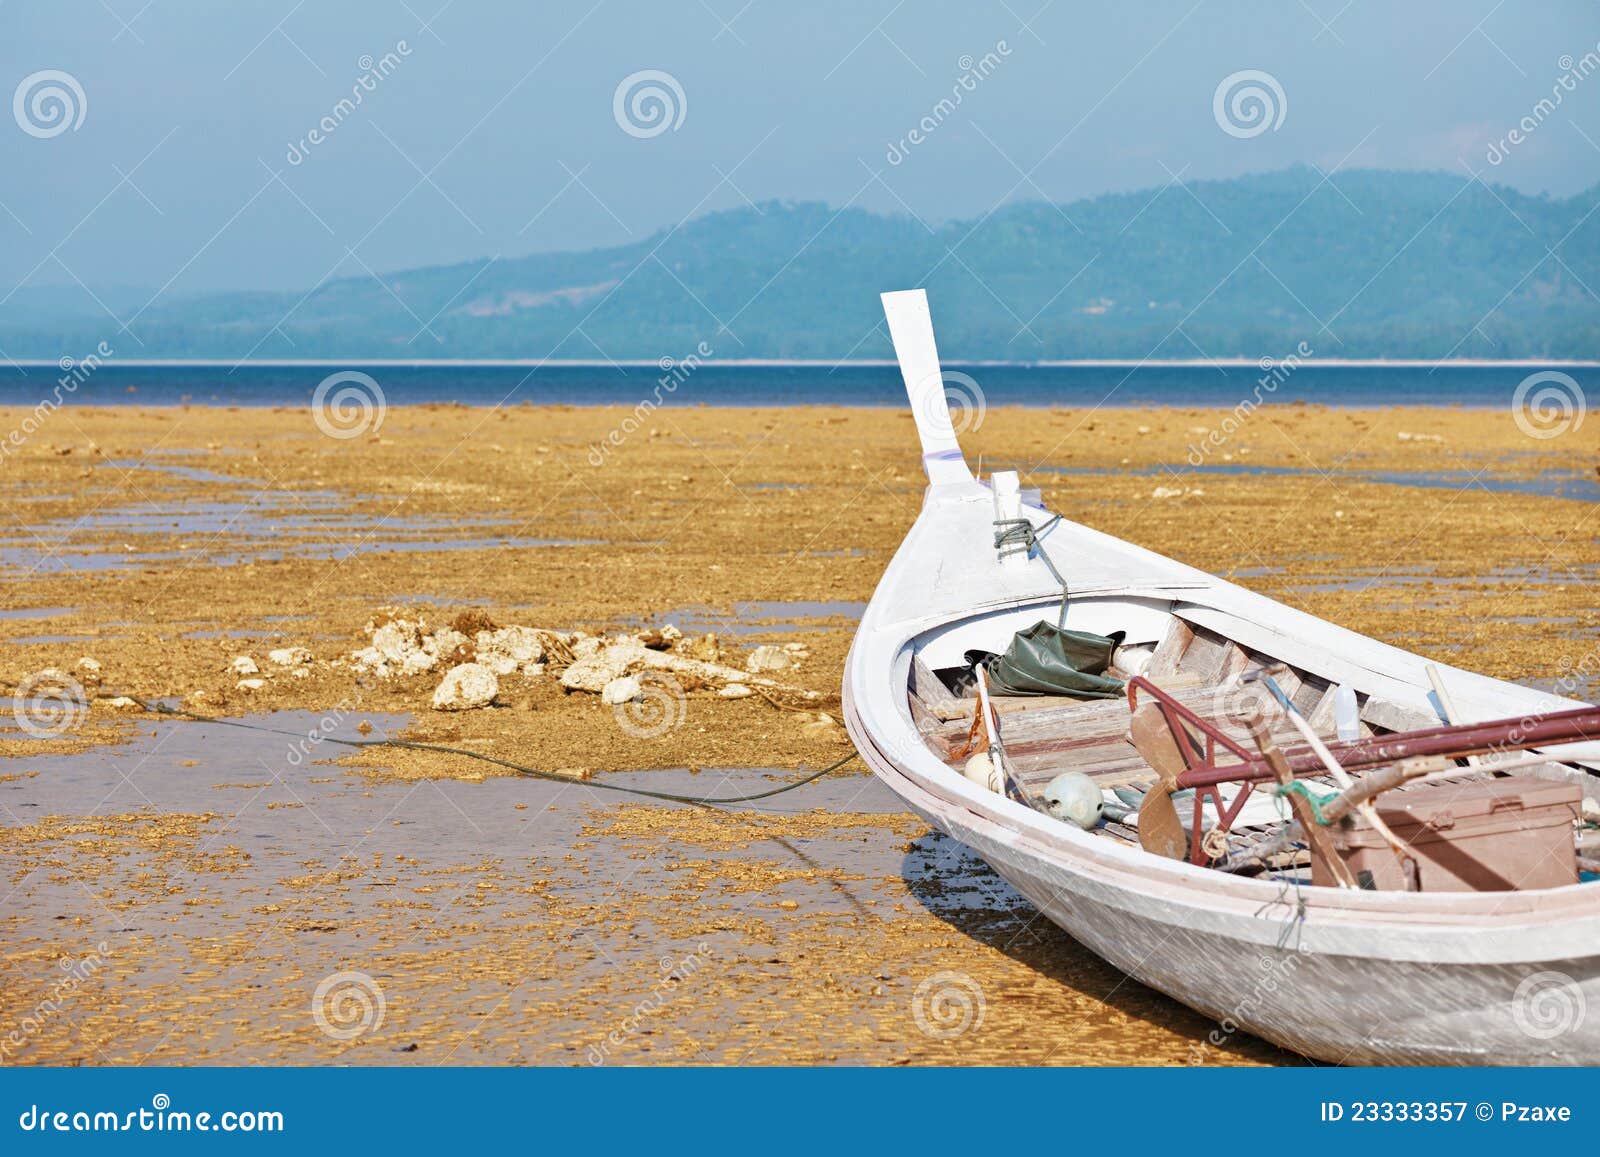 Thai Fishing Wooden Boat On The Coast Royalty Free Stock Photography 